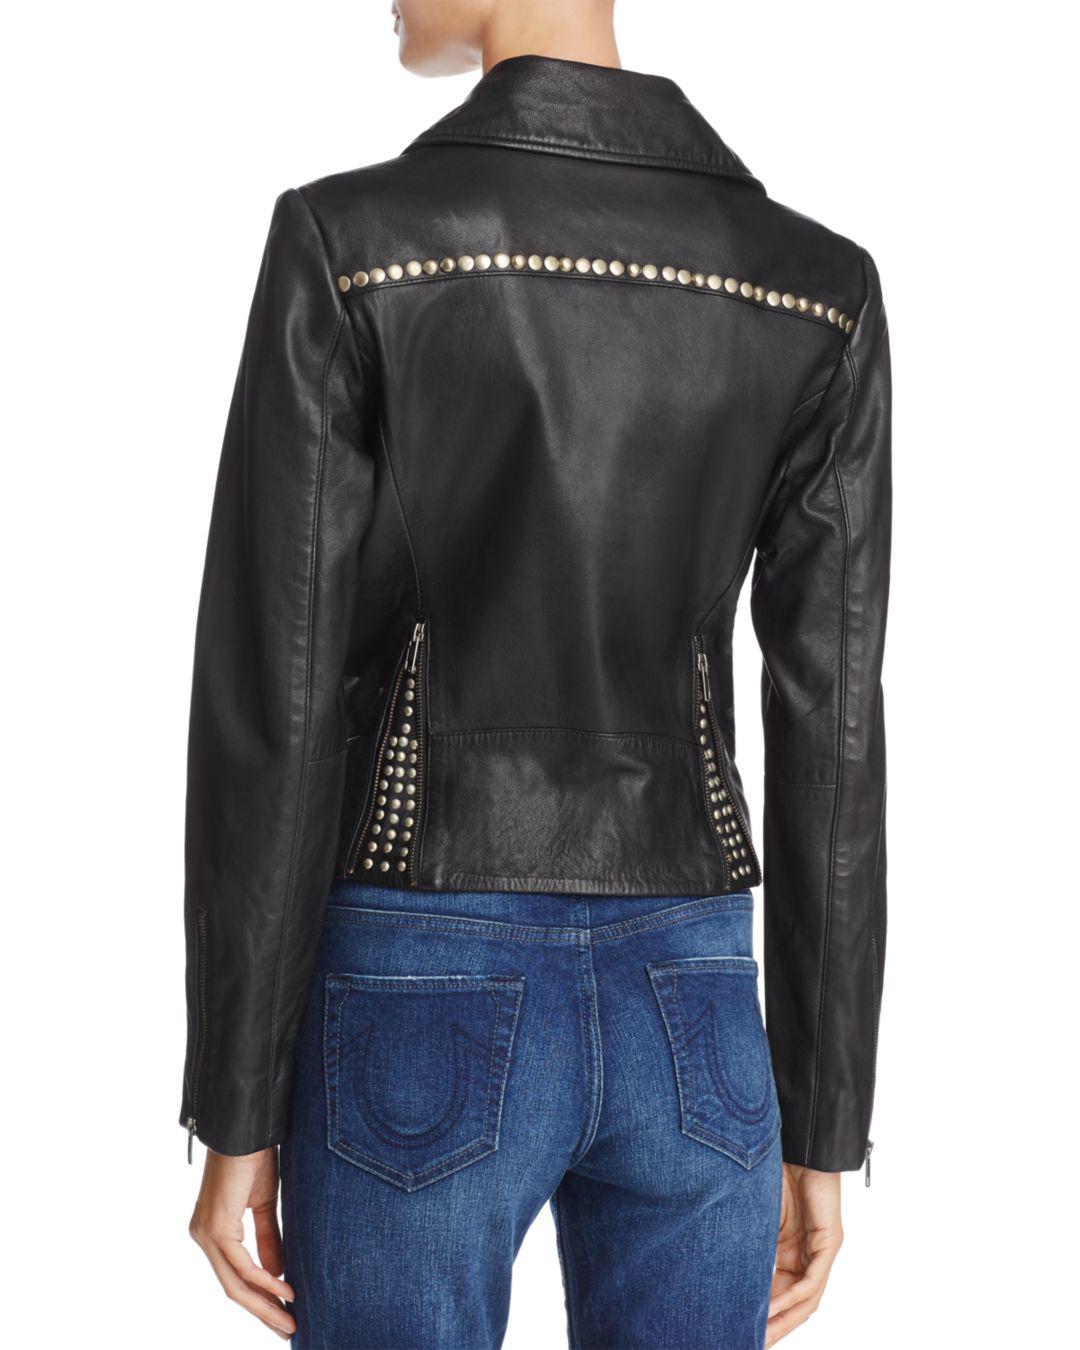 True Religion Studded Leather Jacket in Black - Lyst